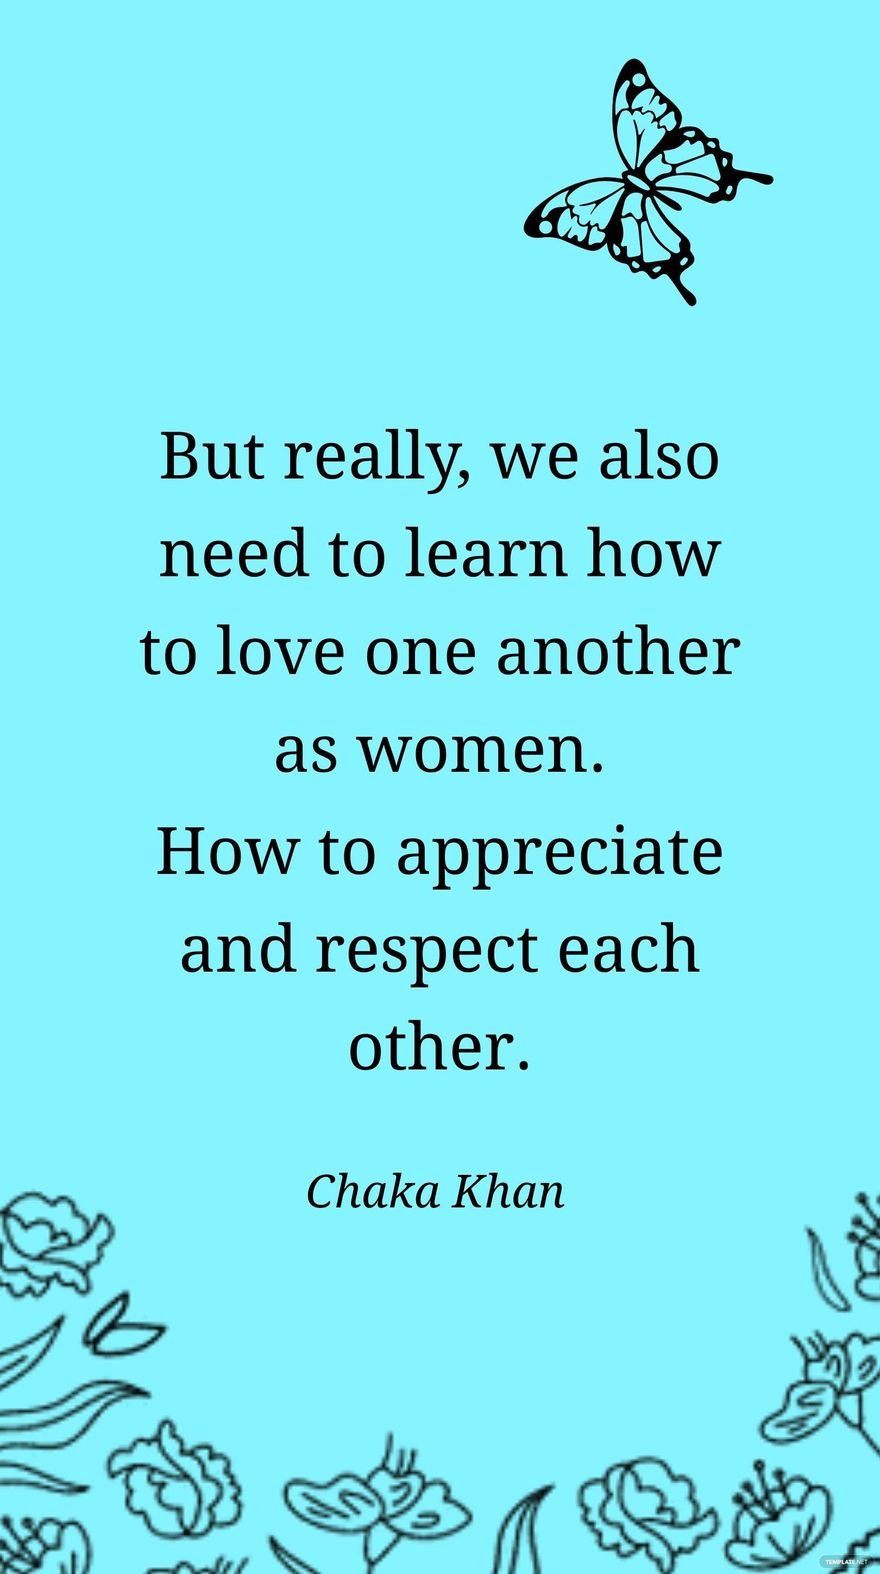 Chaka Khan- But really, we also need to learn how to love one another as women. How to appreciate and respect each other. in JPG